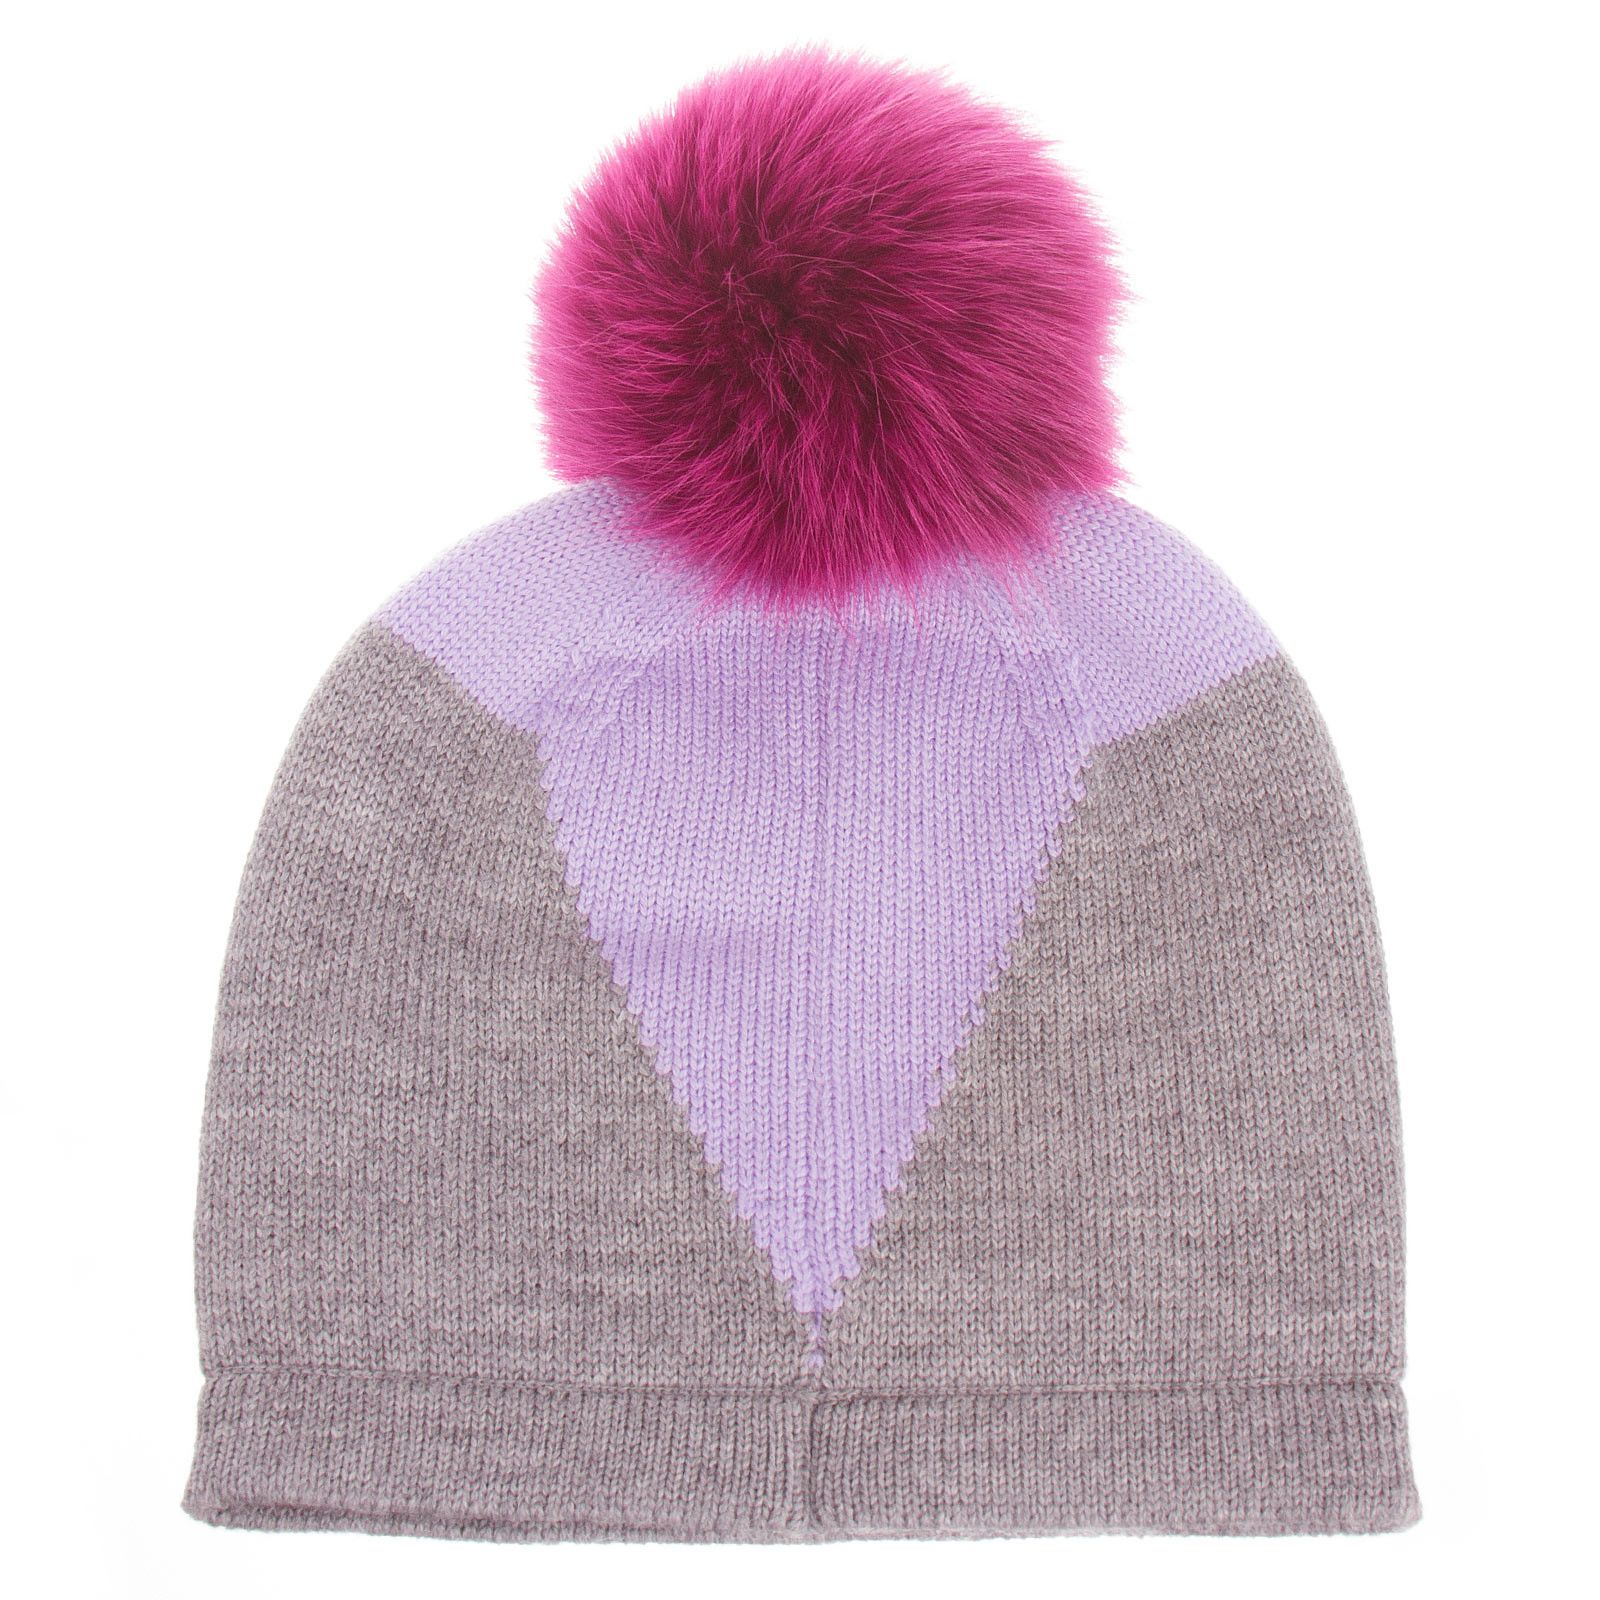 Girls Grey Monster Wool Hat With Red Fur Trims - CÉMAROSE | Children's Fashion Store - 2